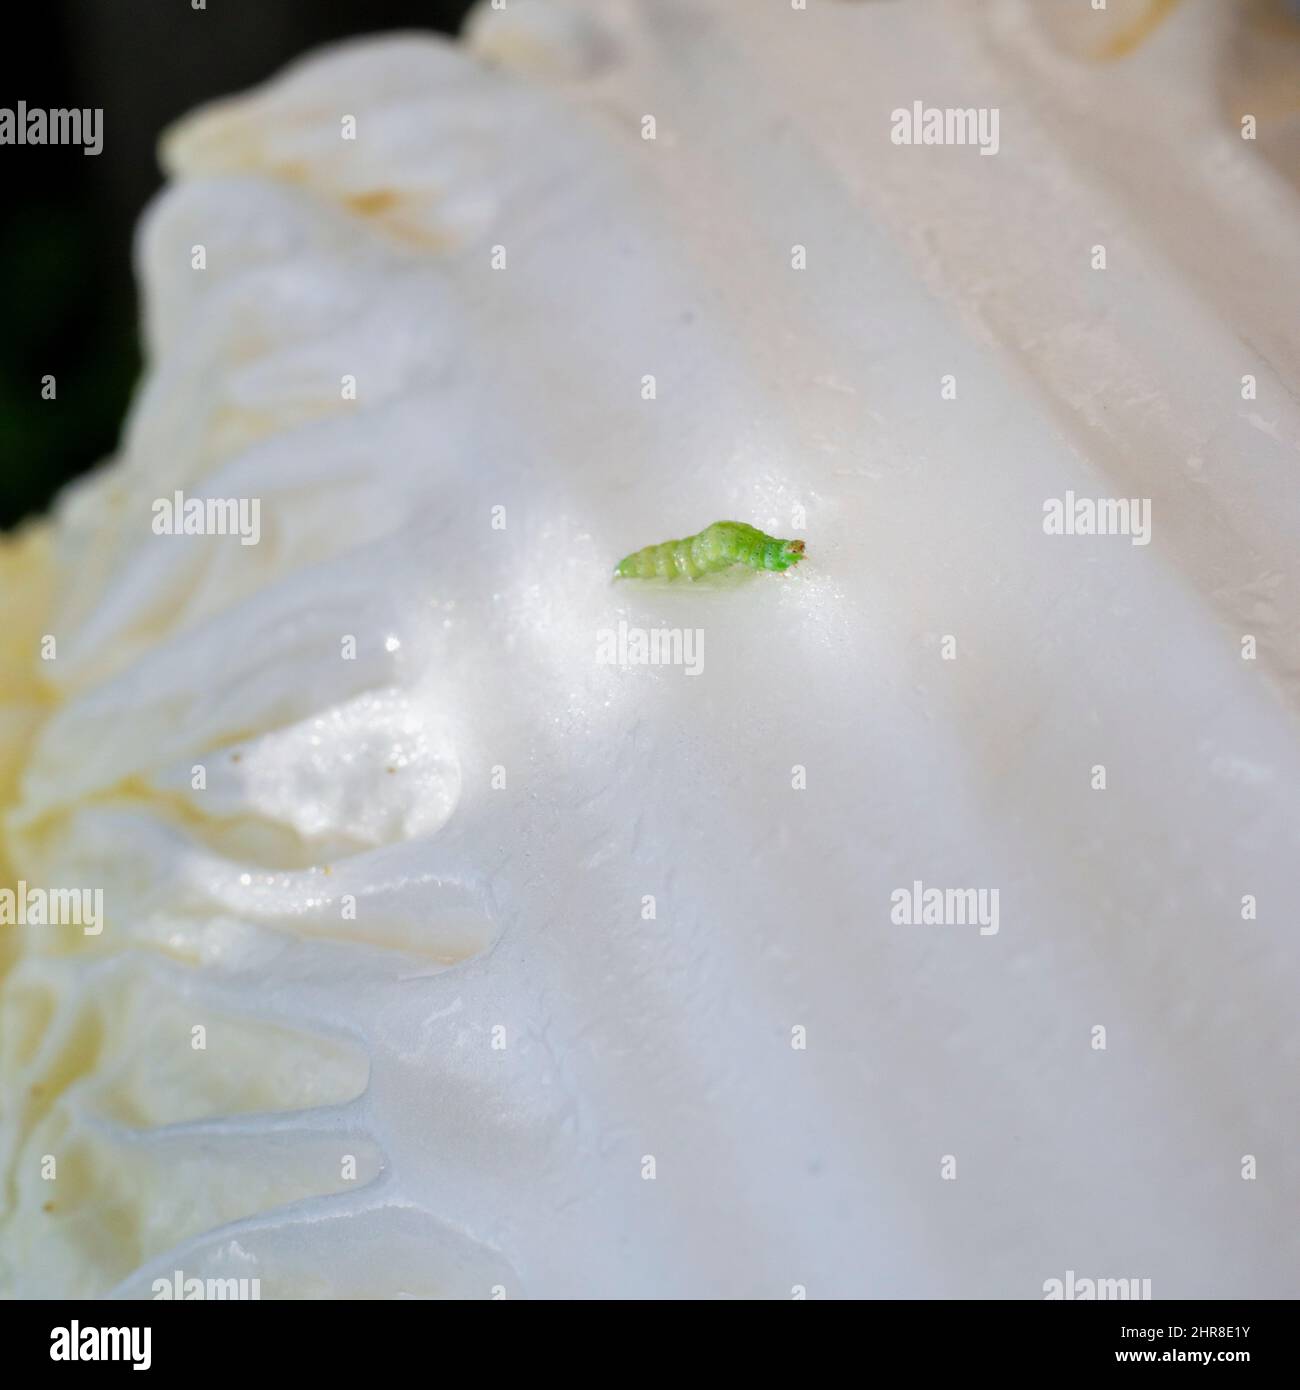 Worm arching its body crawling on Chinese cabbage. Vertical format. Stock Photo